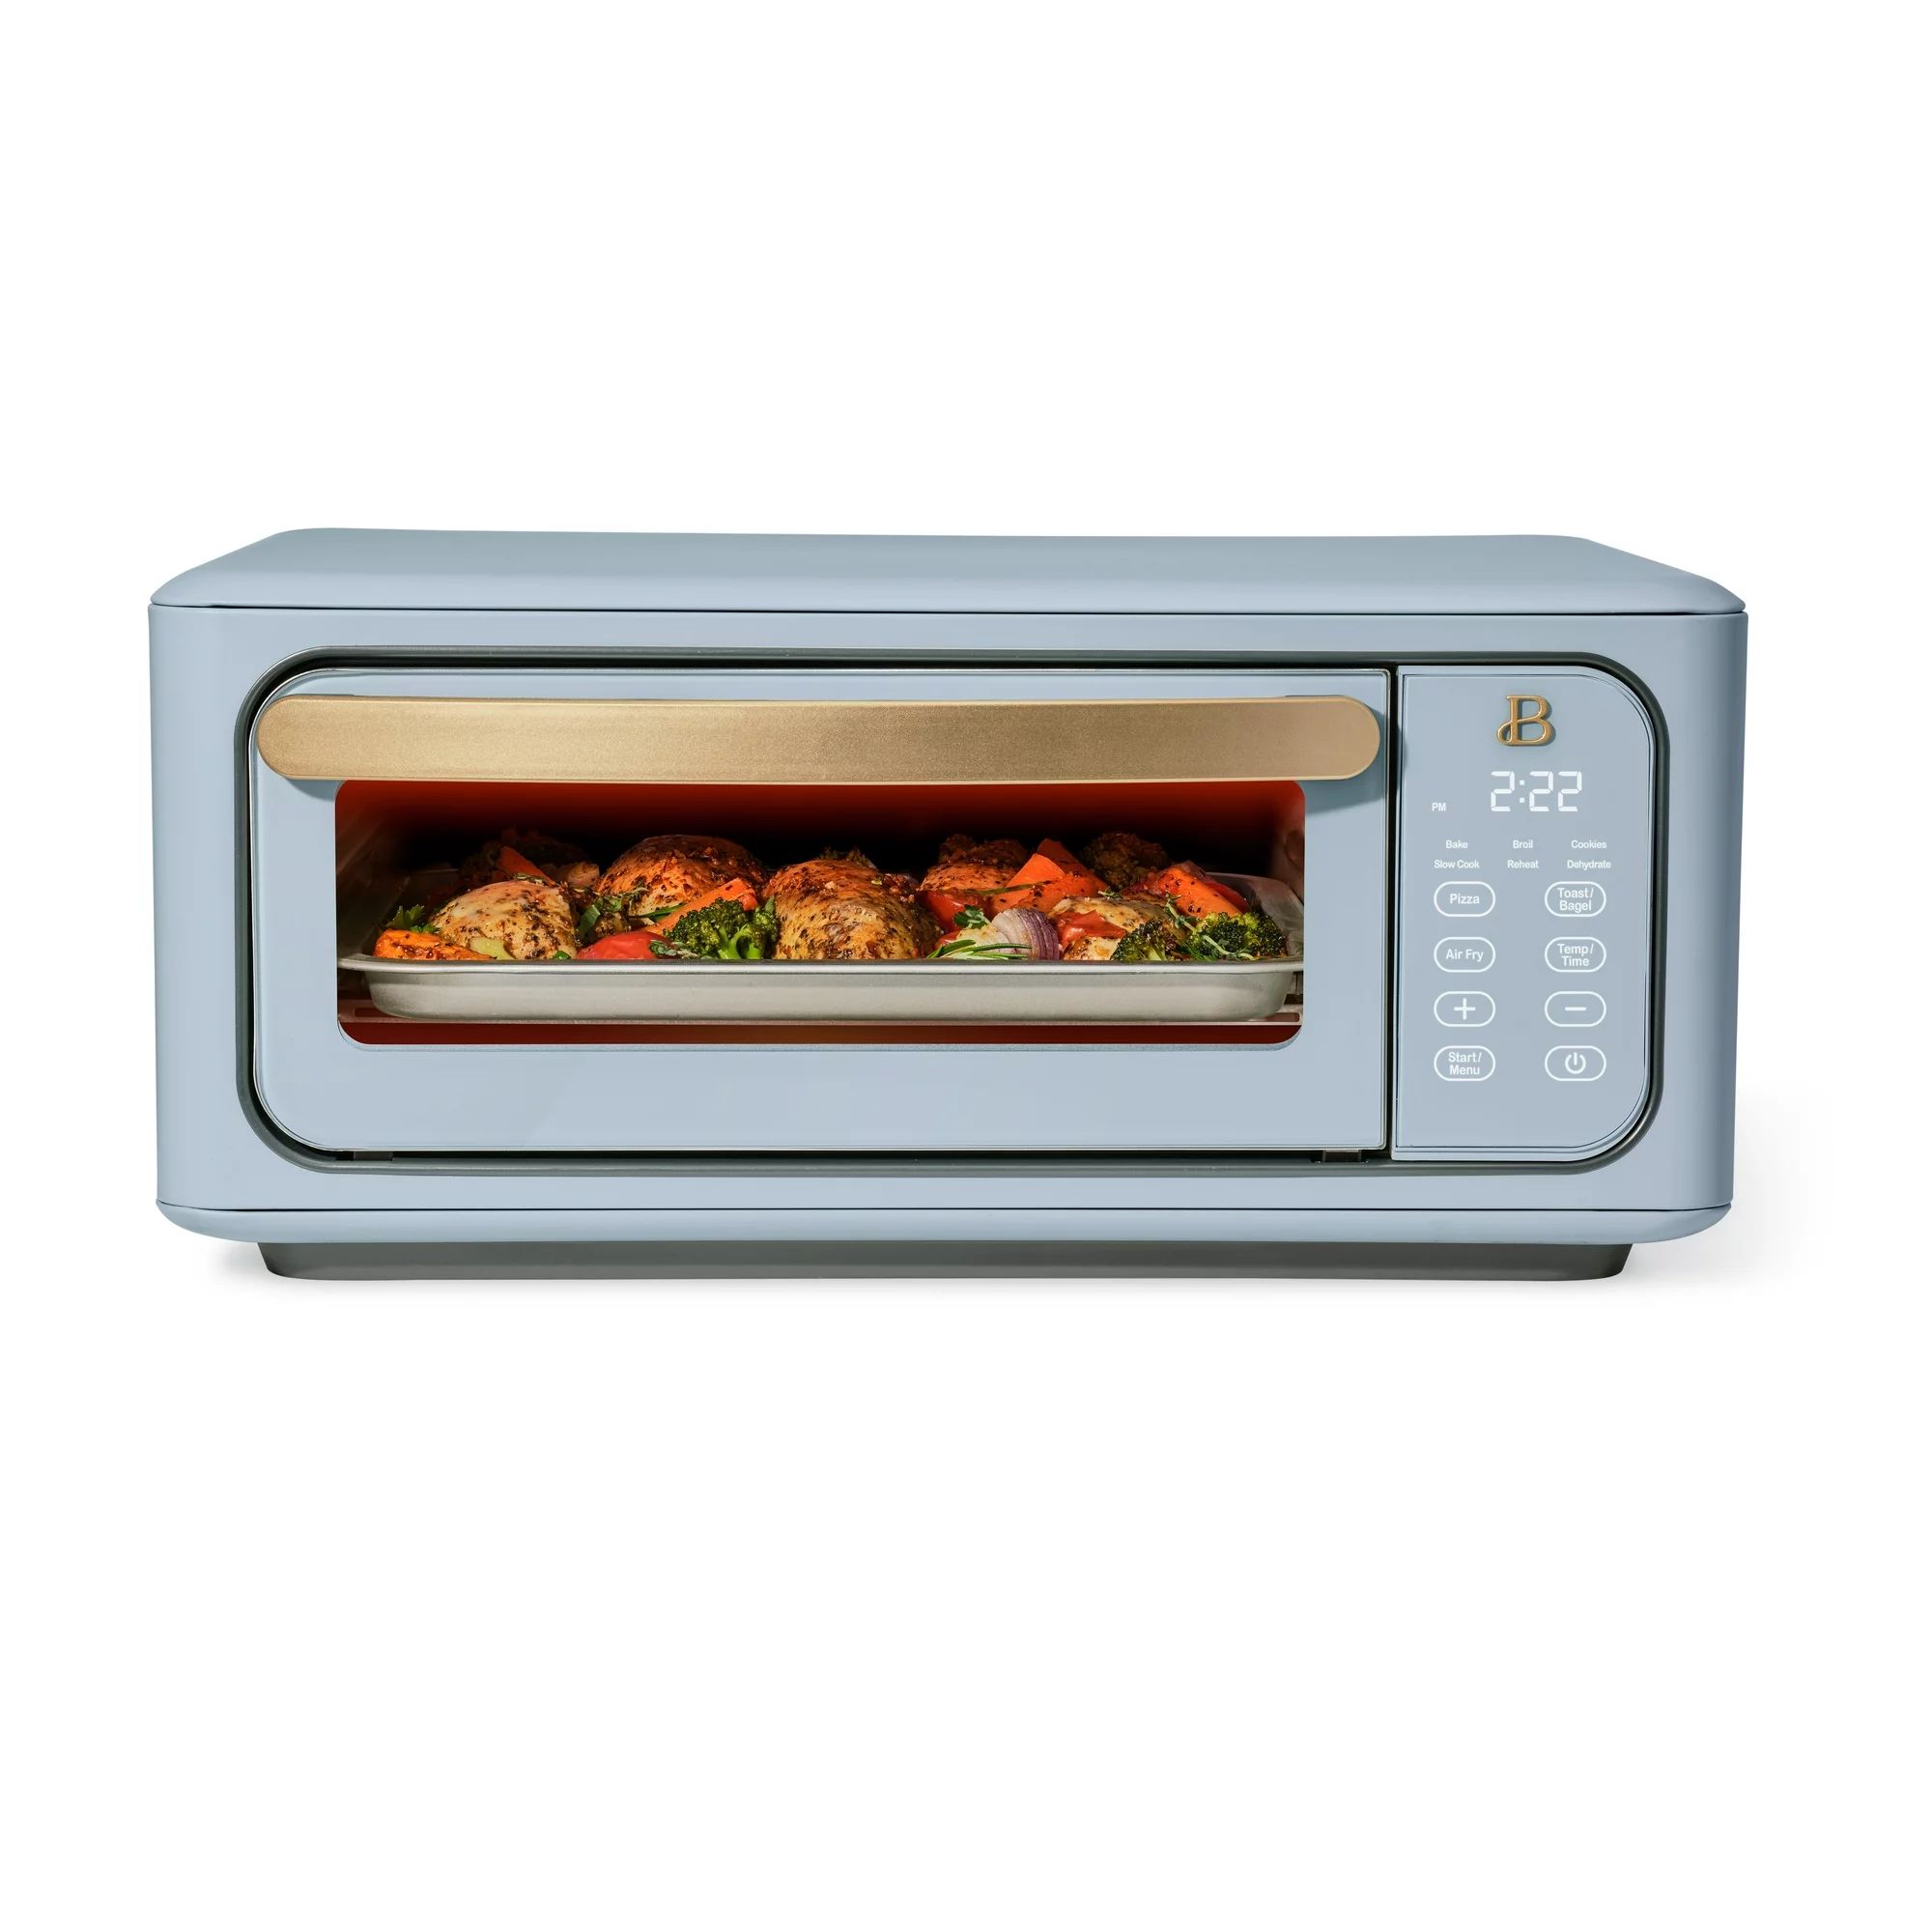 Beautiful Infrared Air Fry Toaster Oven, 9-Slice, 1800 W, Cornflower Blue by Drew Barrymore | Walmart (US)